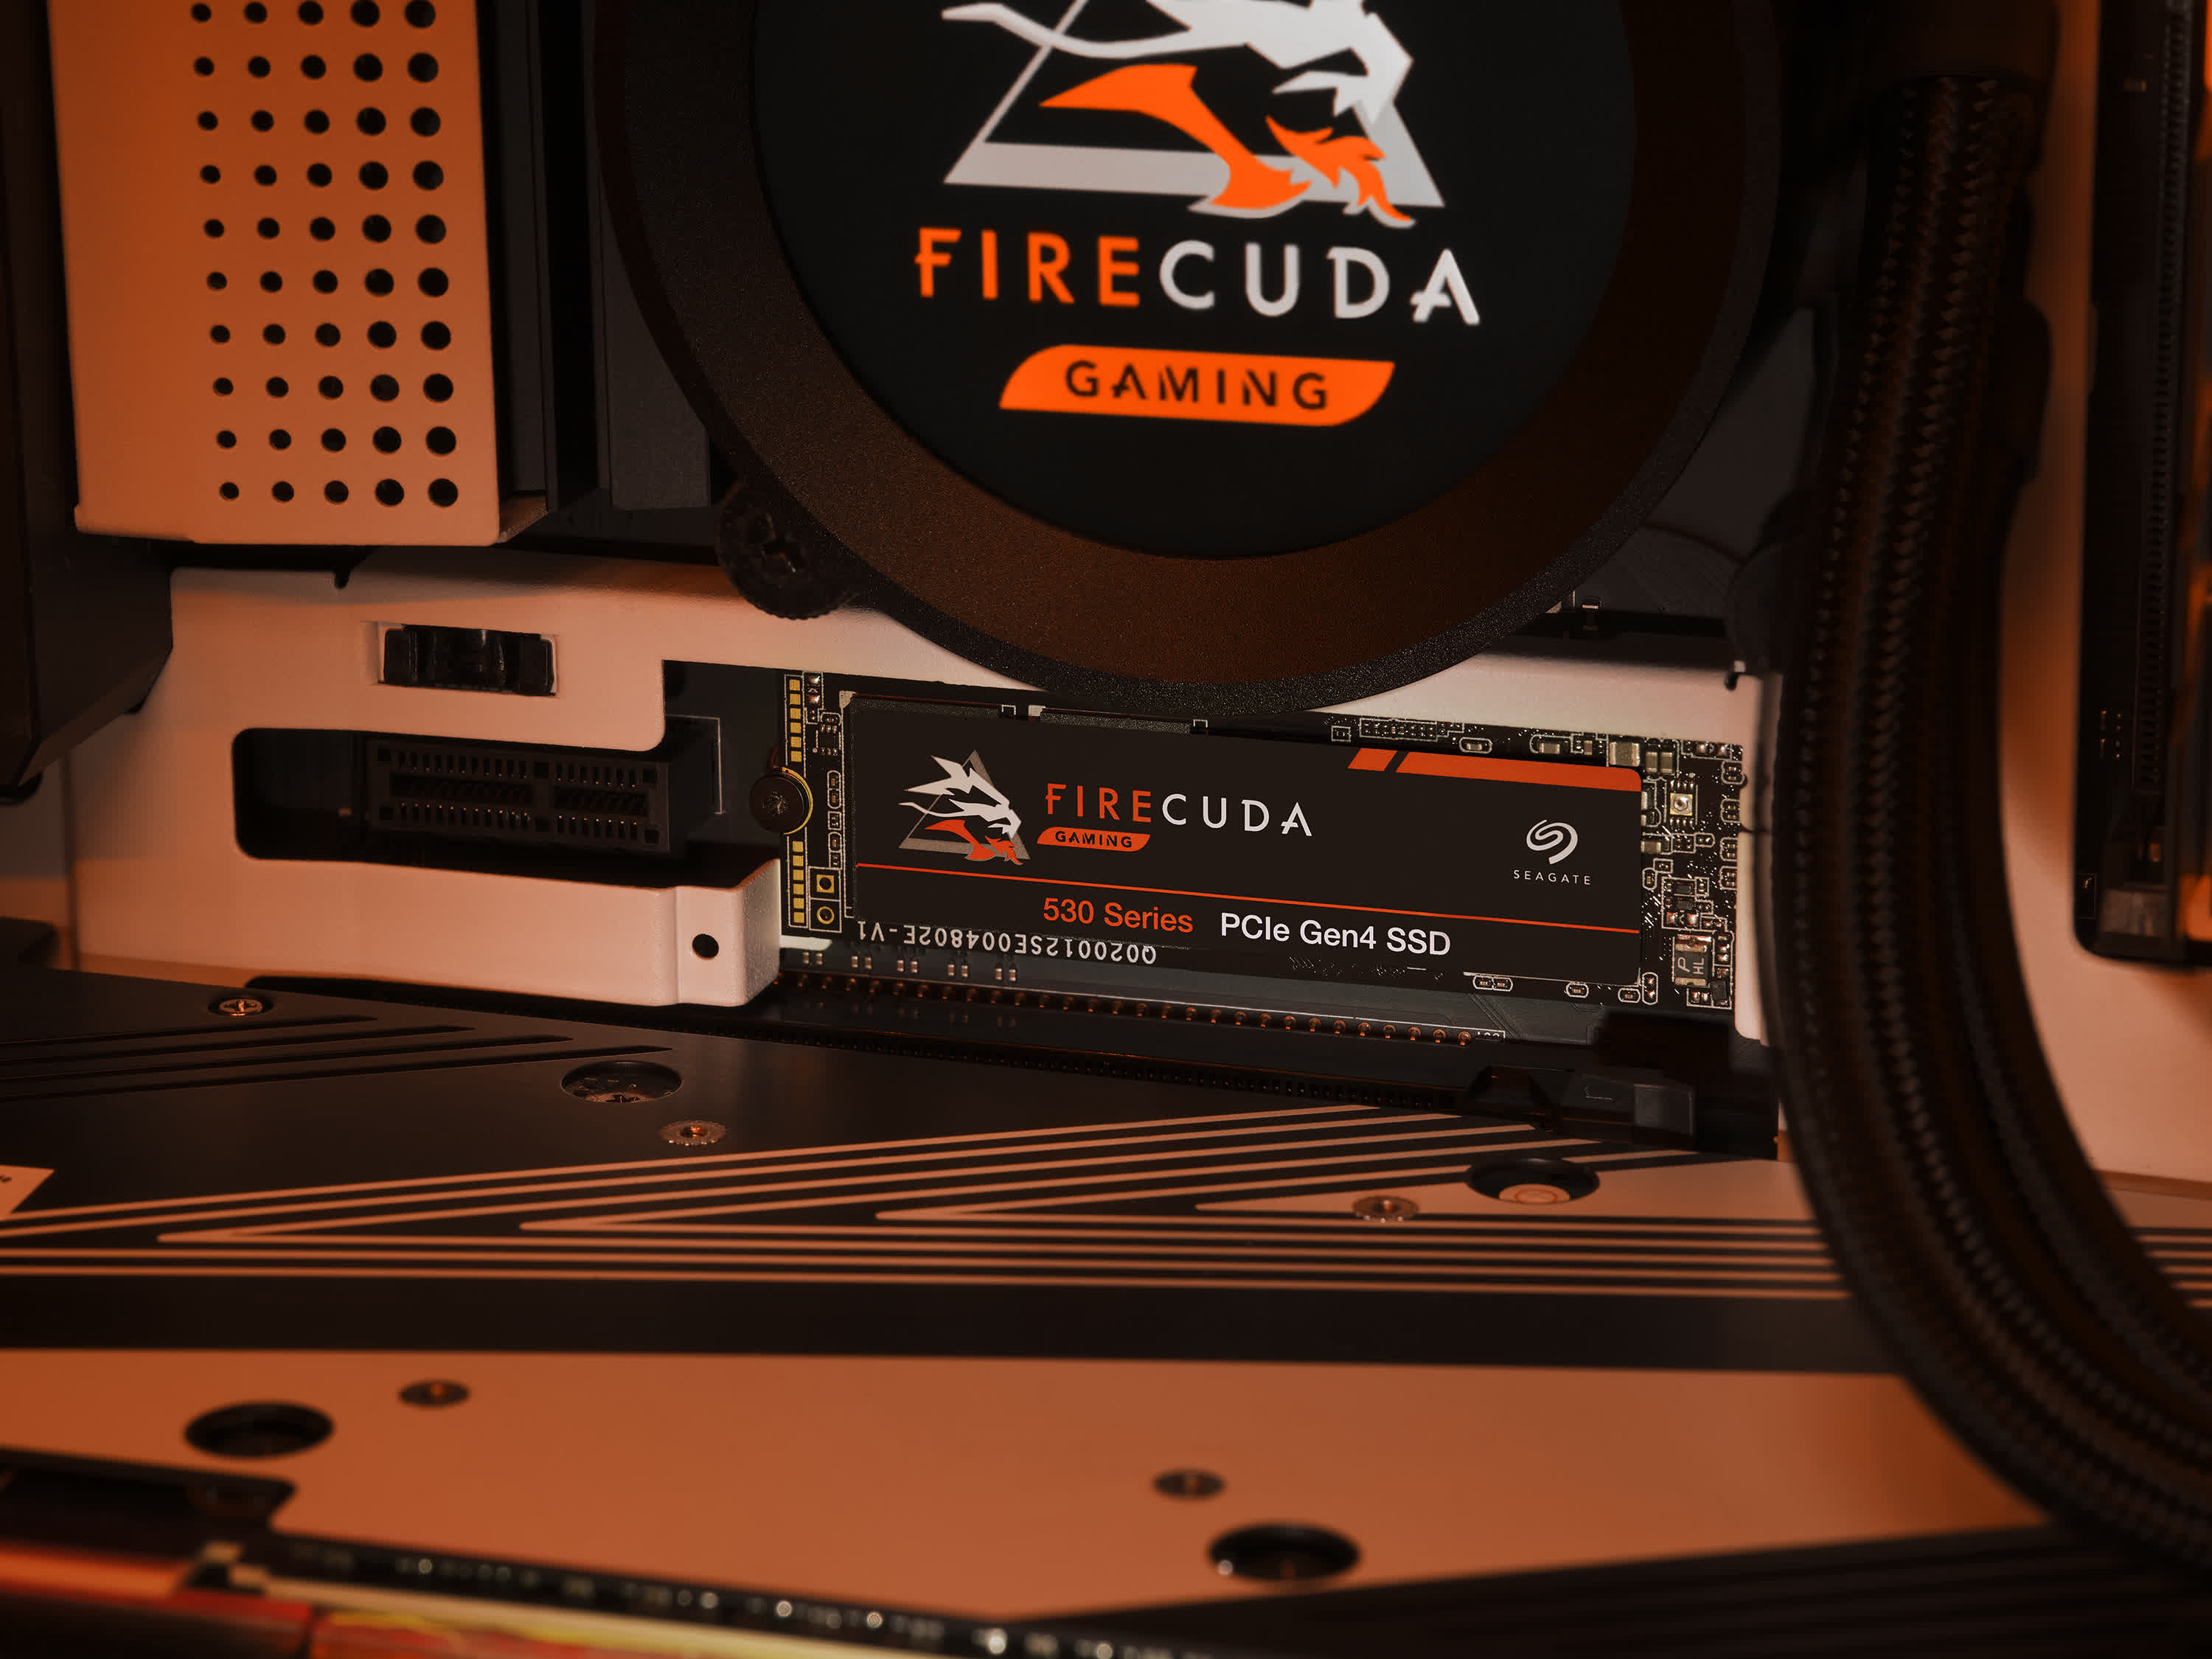 Seagate's new FireCuda 530 M.2 gaming SSD joins the elite club of 7,000MB/s PCIe Gen4 drives